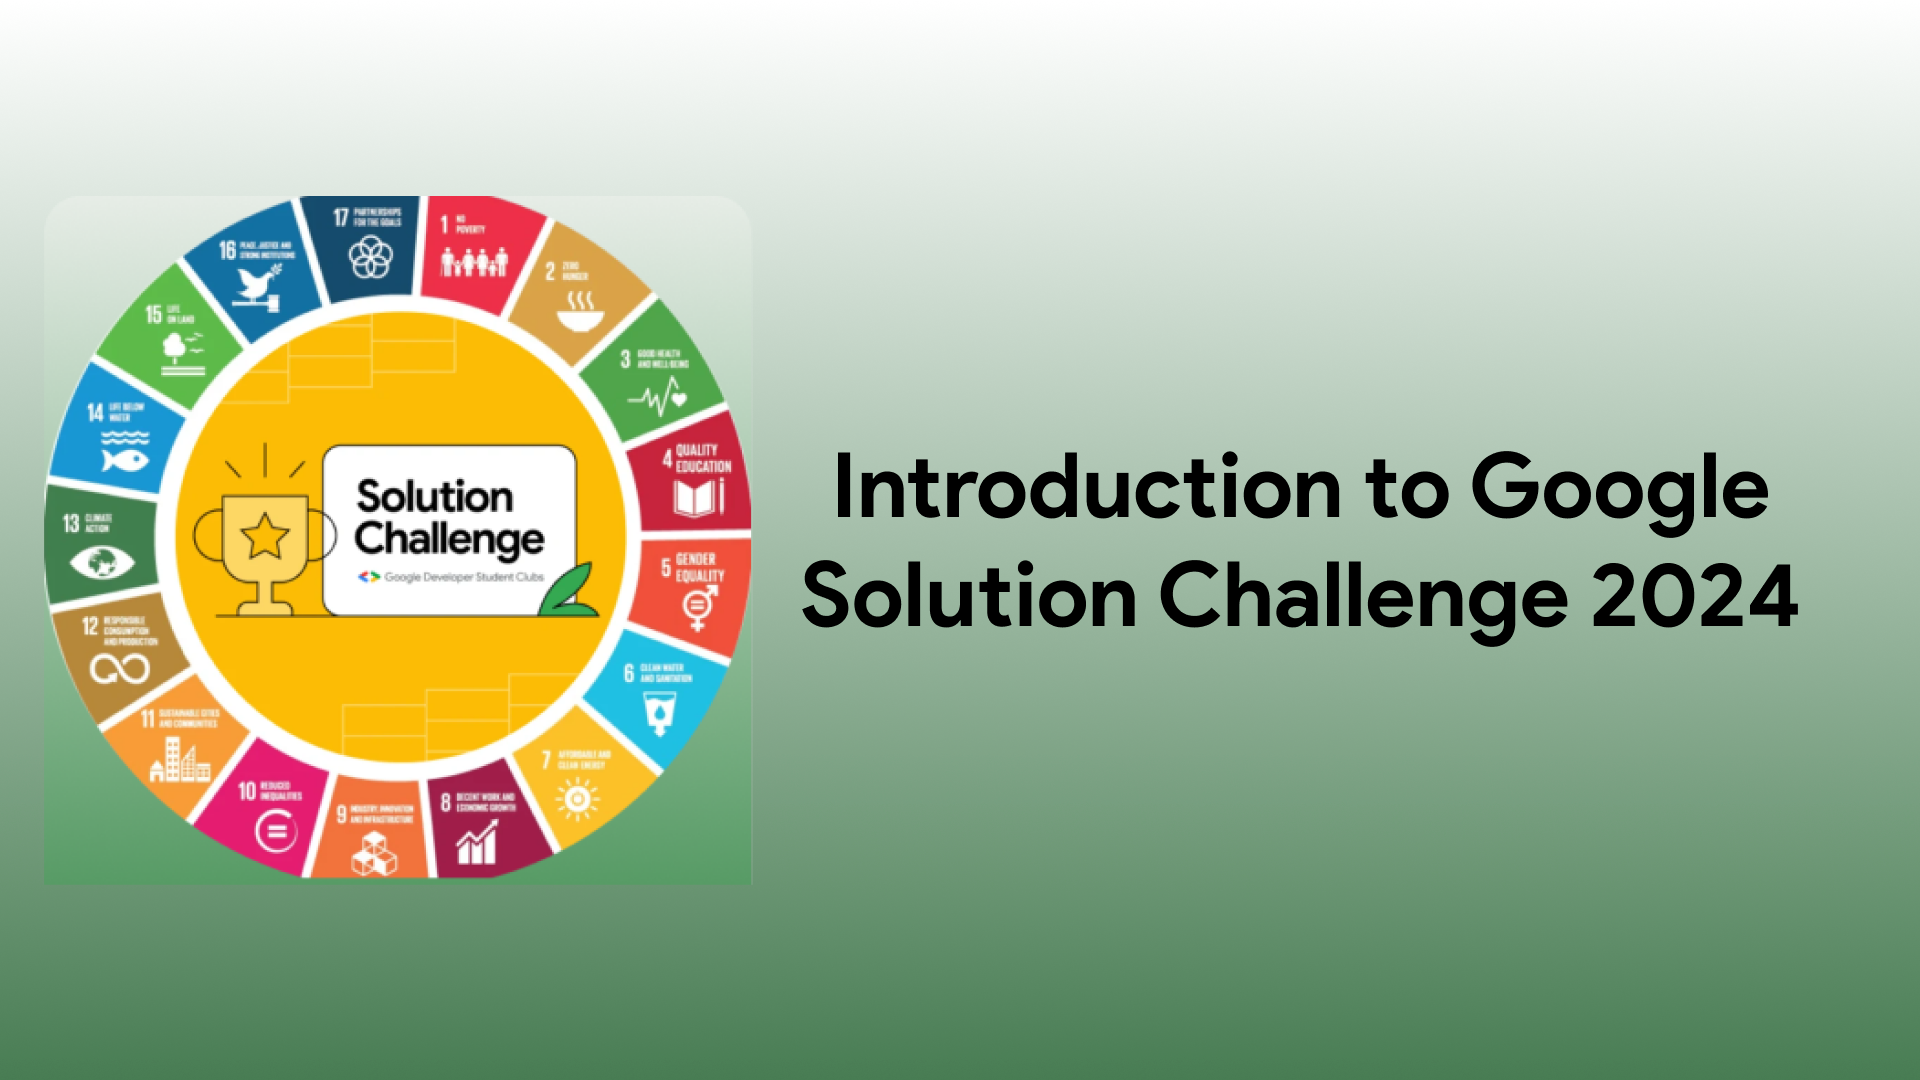 Introduction to Google Solution Challenge 2024